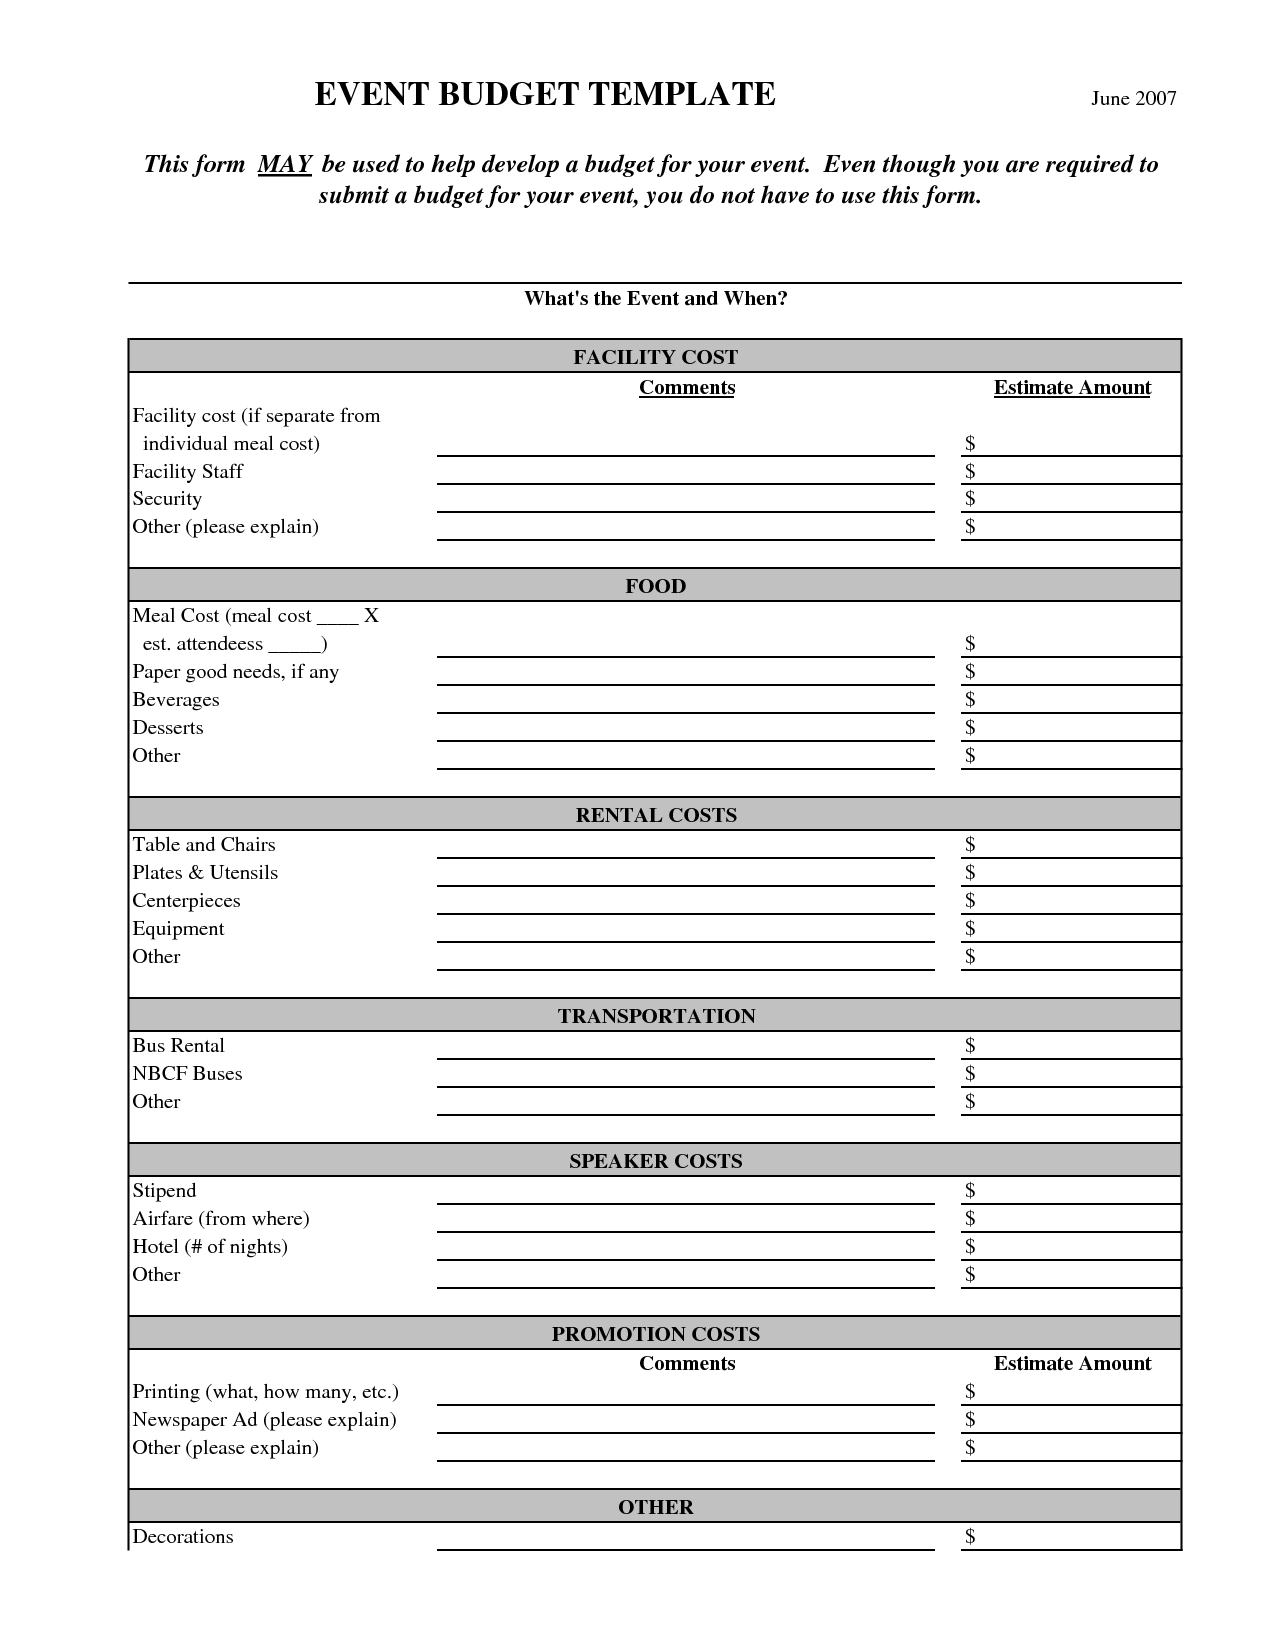 template : Party Planner Template  Event Budget Template June  For Party Planning Budget Template With Regard To Party Planning Budget Template